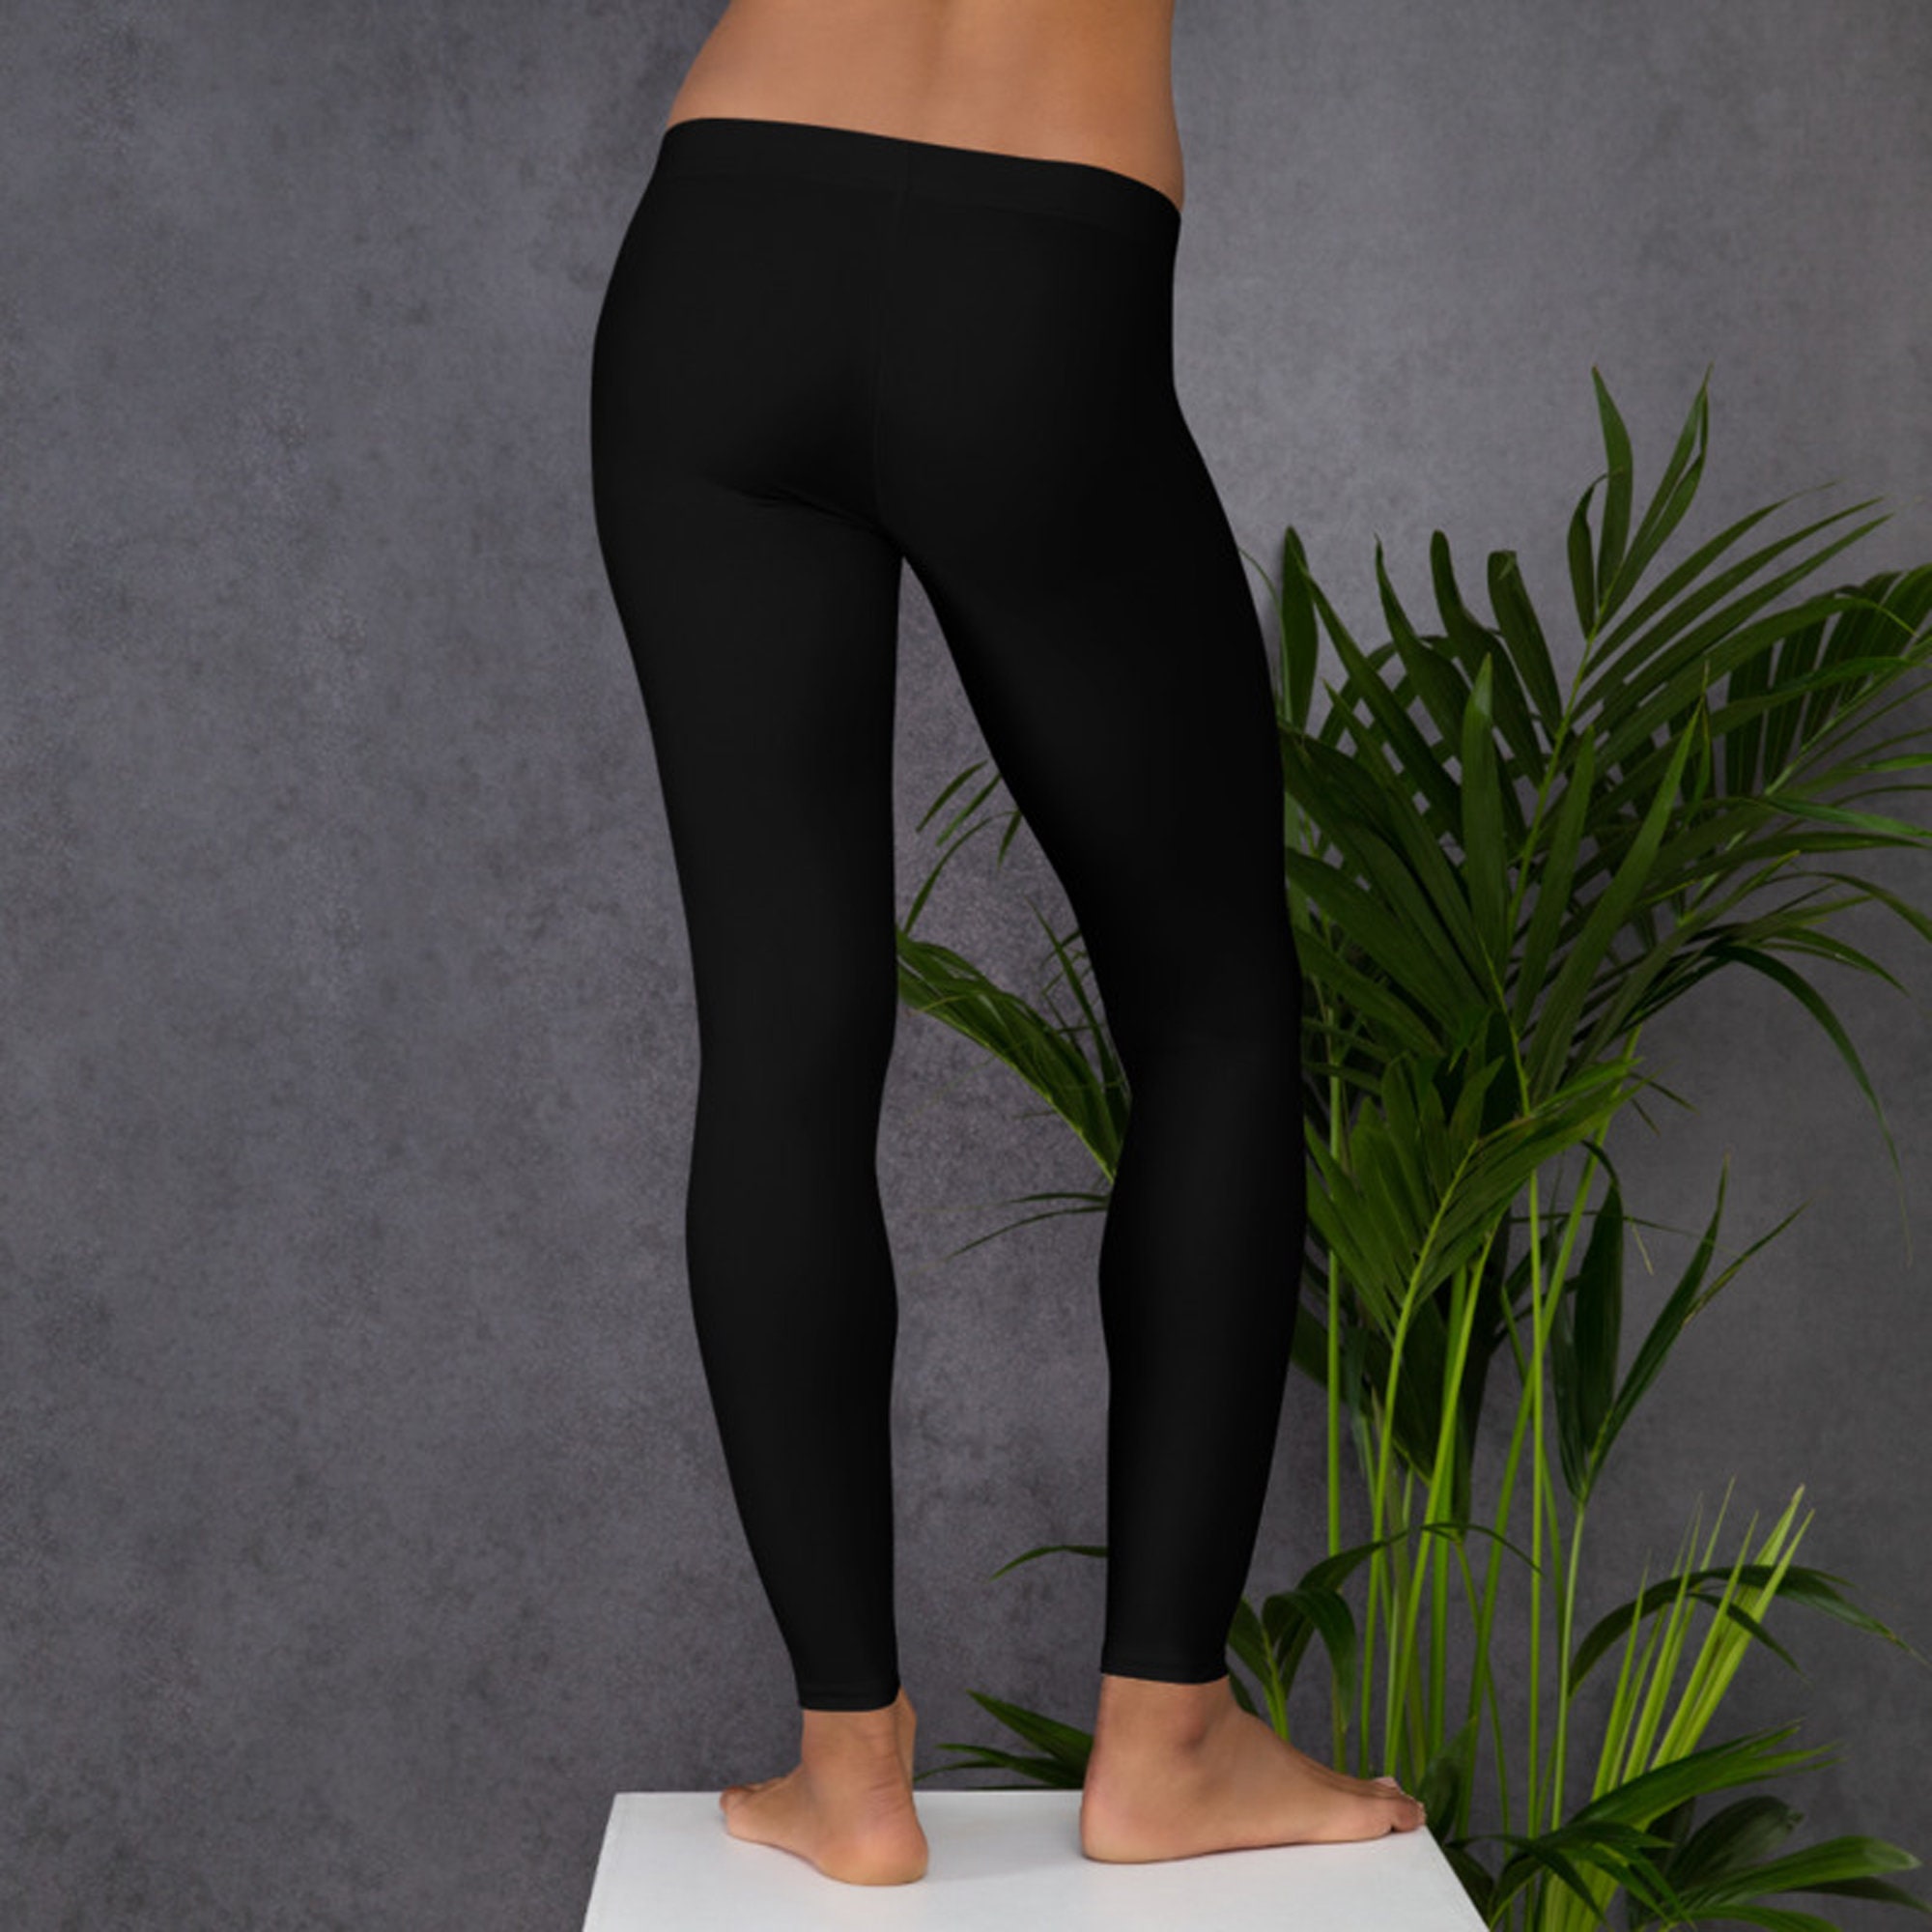 Plain Black Leggings for Yoga, Gym and Casual Wear. High Quality Leggings,  These Never Lose Their Stretch. -  Israel